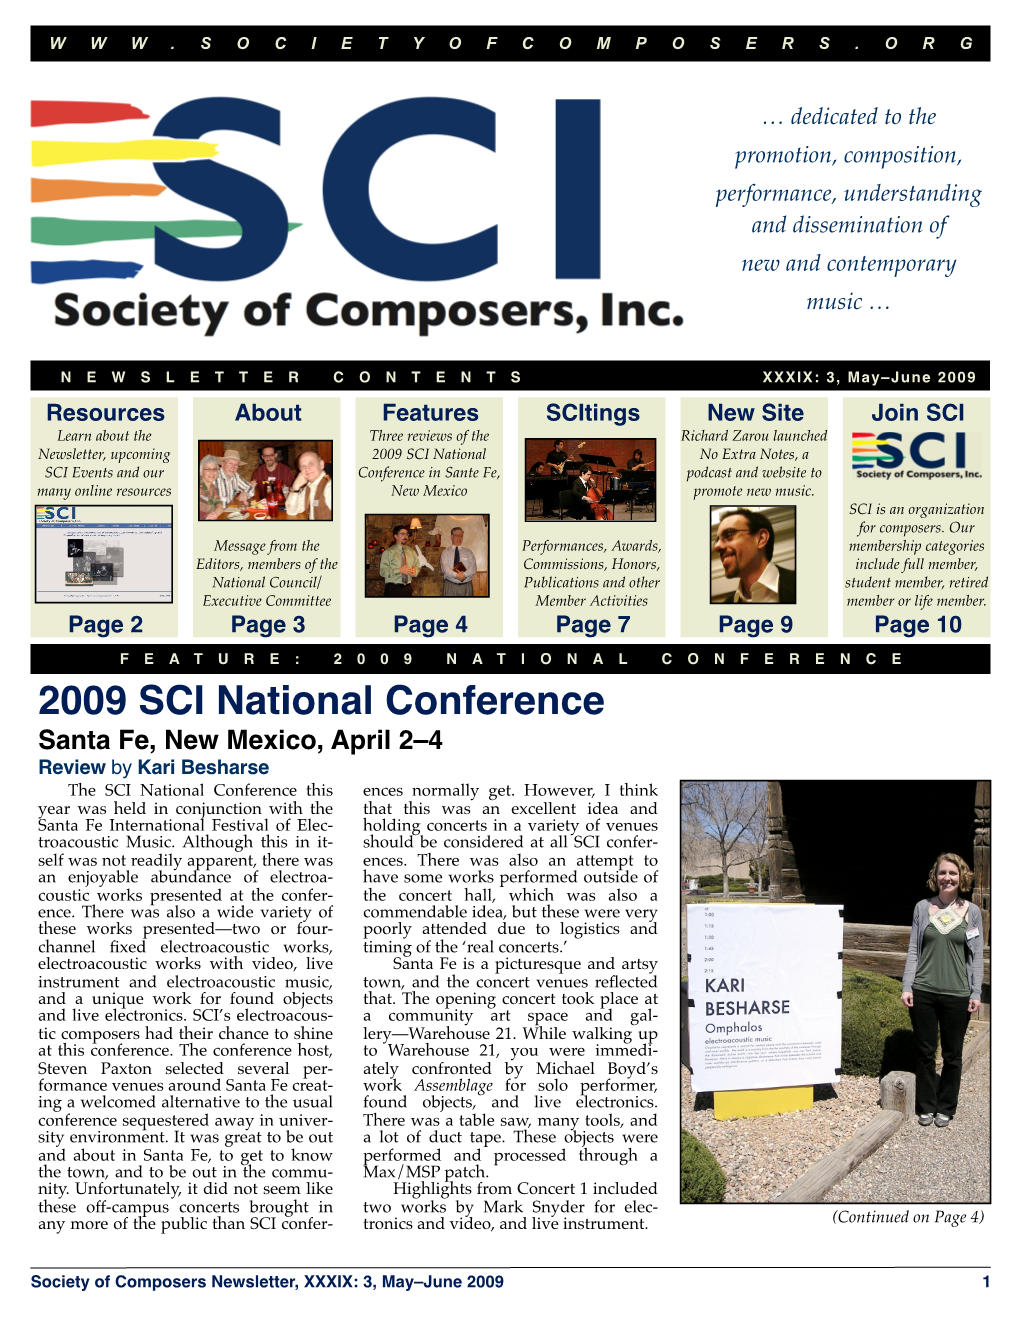 SCI Newsletter May / June 2009